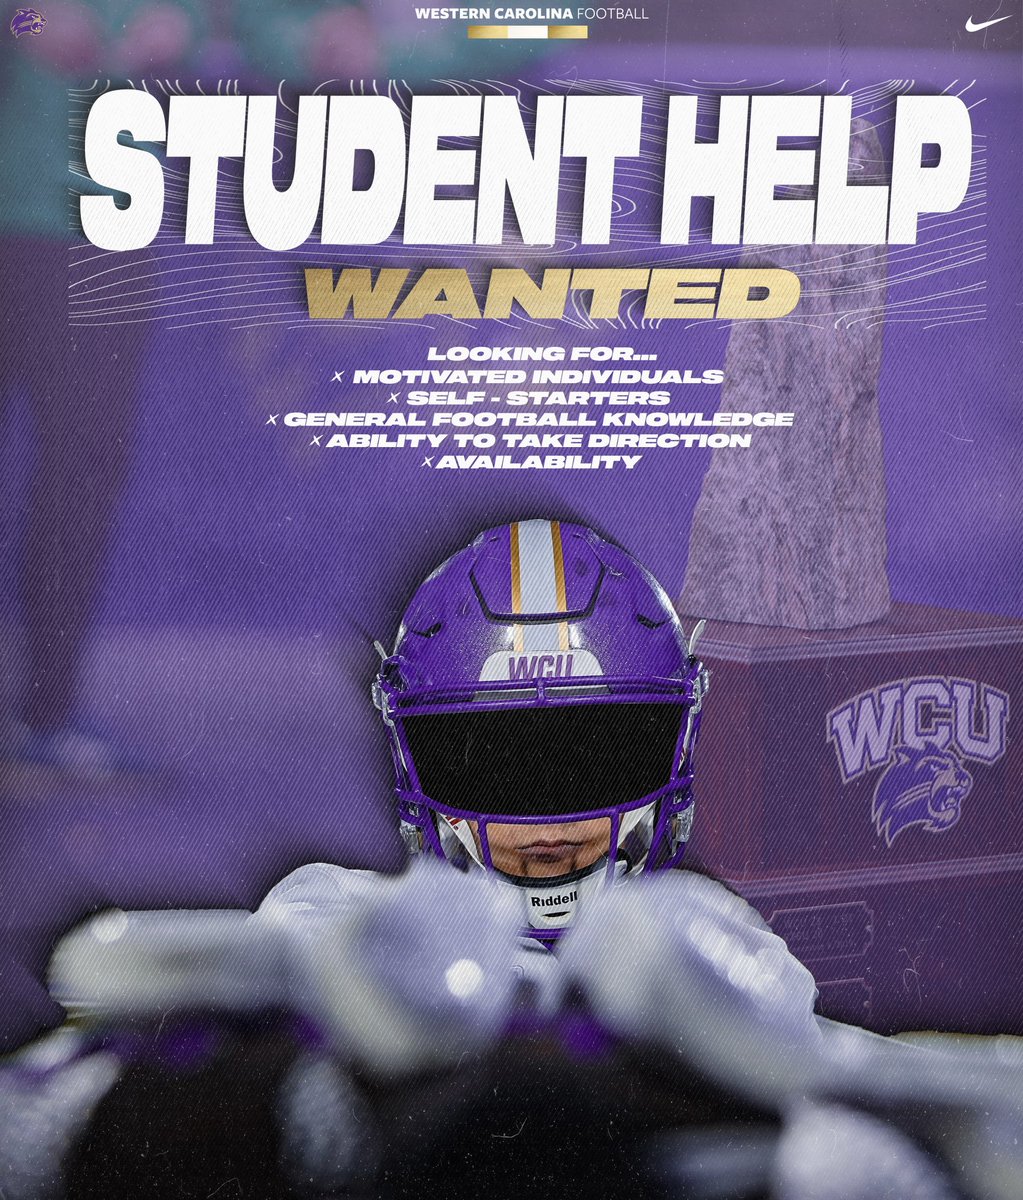 🚨 CALLING ALL WCU STUDENTS 🚨 Do you want to be apart of something bigger than yourself? Have the opportunity to be apart of a championship culture? If interested email mullenm@wcu.edu #LOTE #OurTime